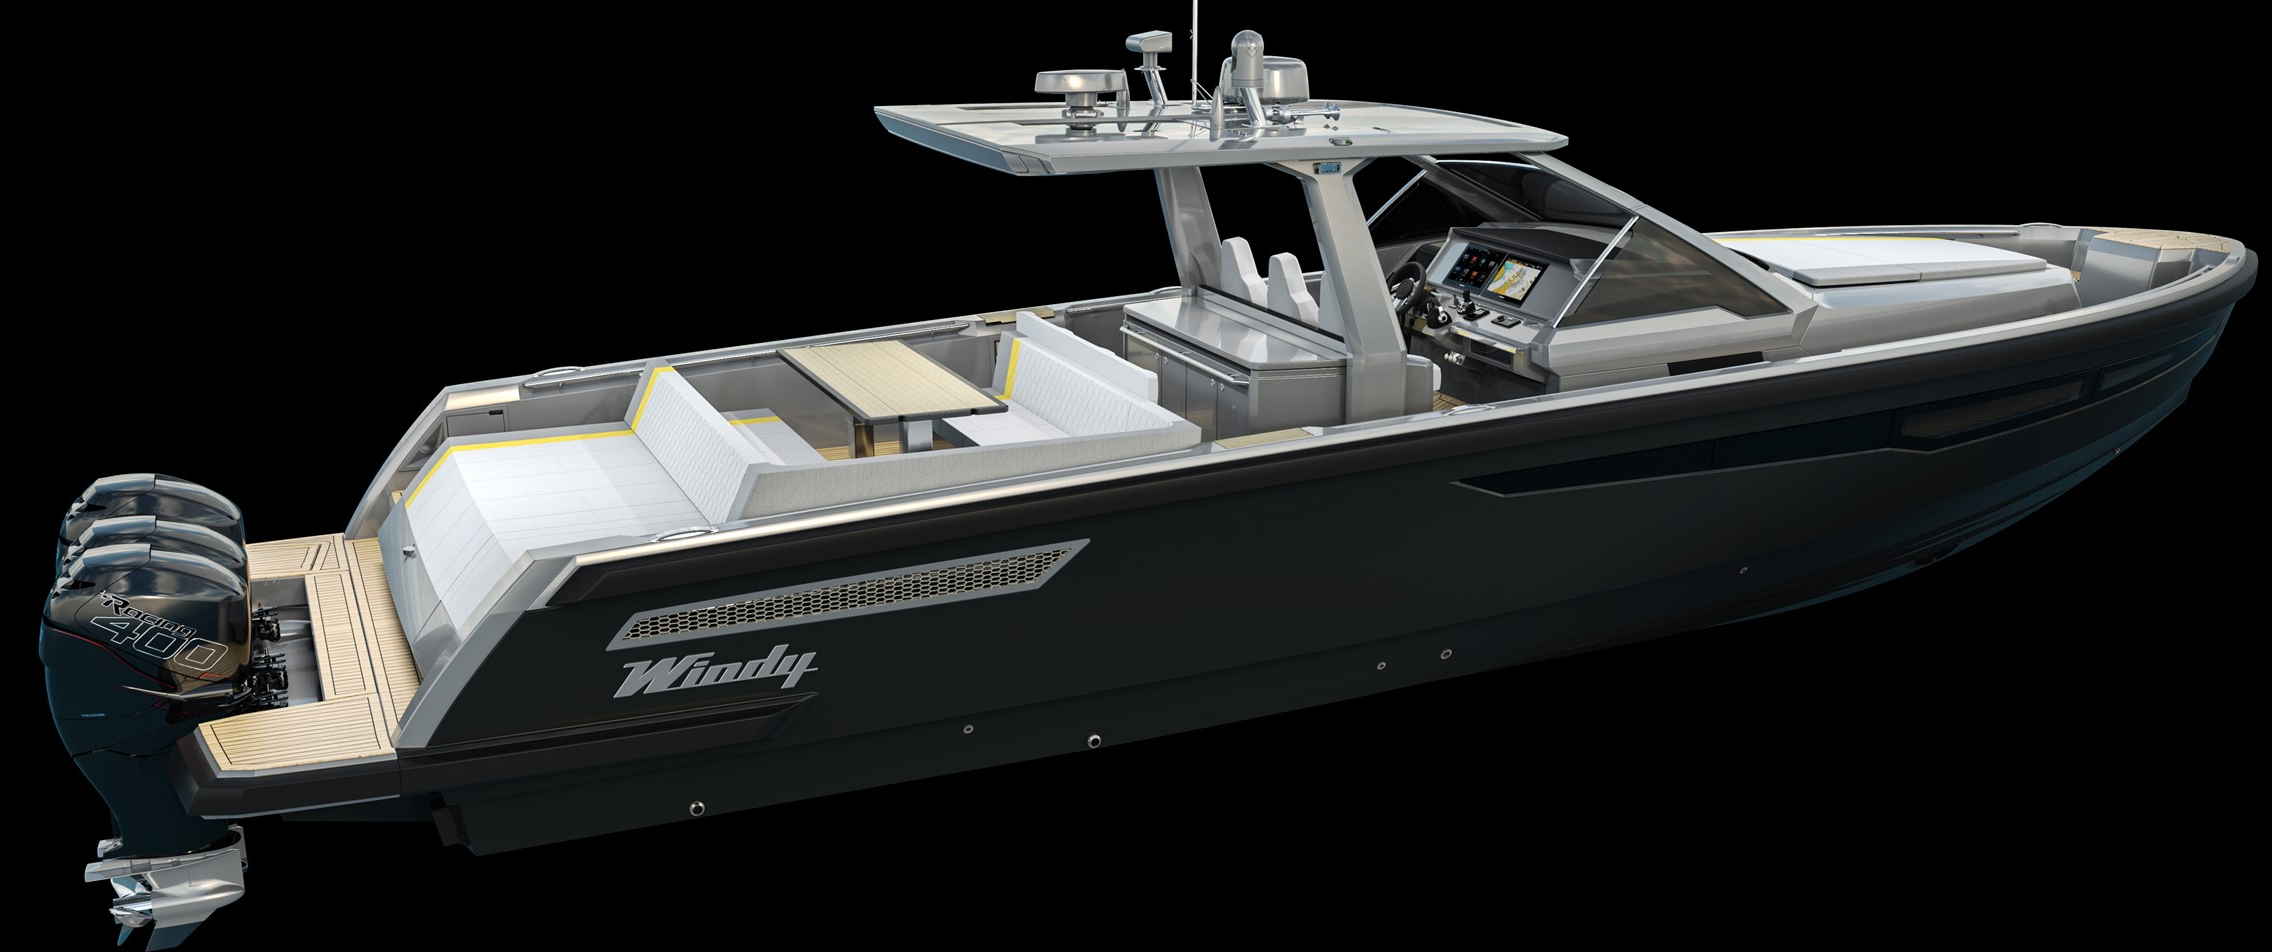 Windy Boats Makes U.S. Debut With Nautical Ventures | BoatTEST